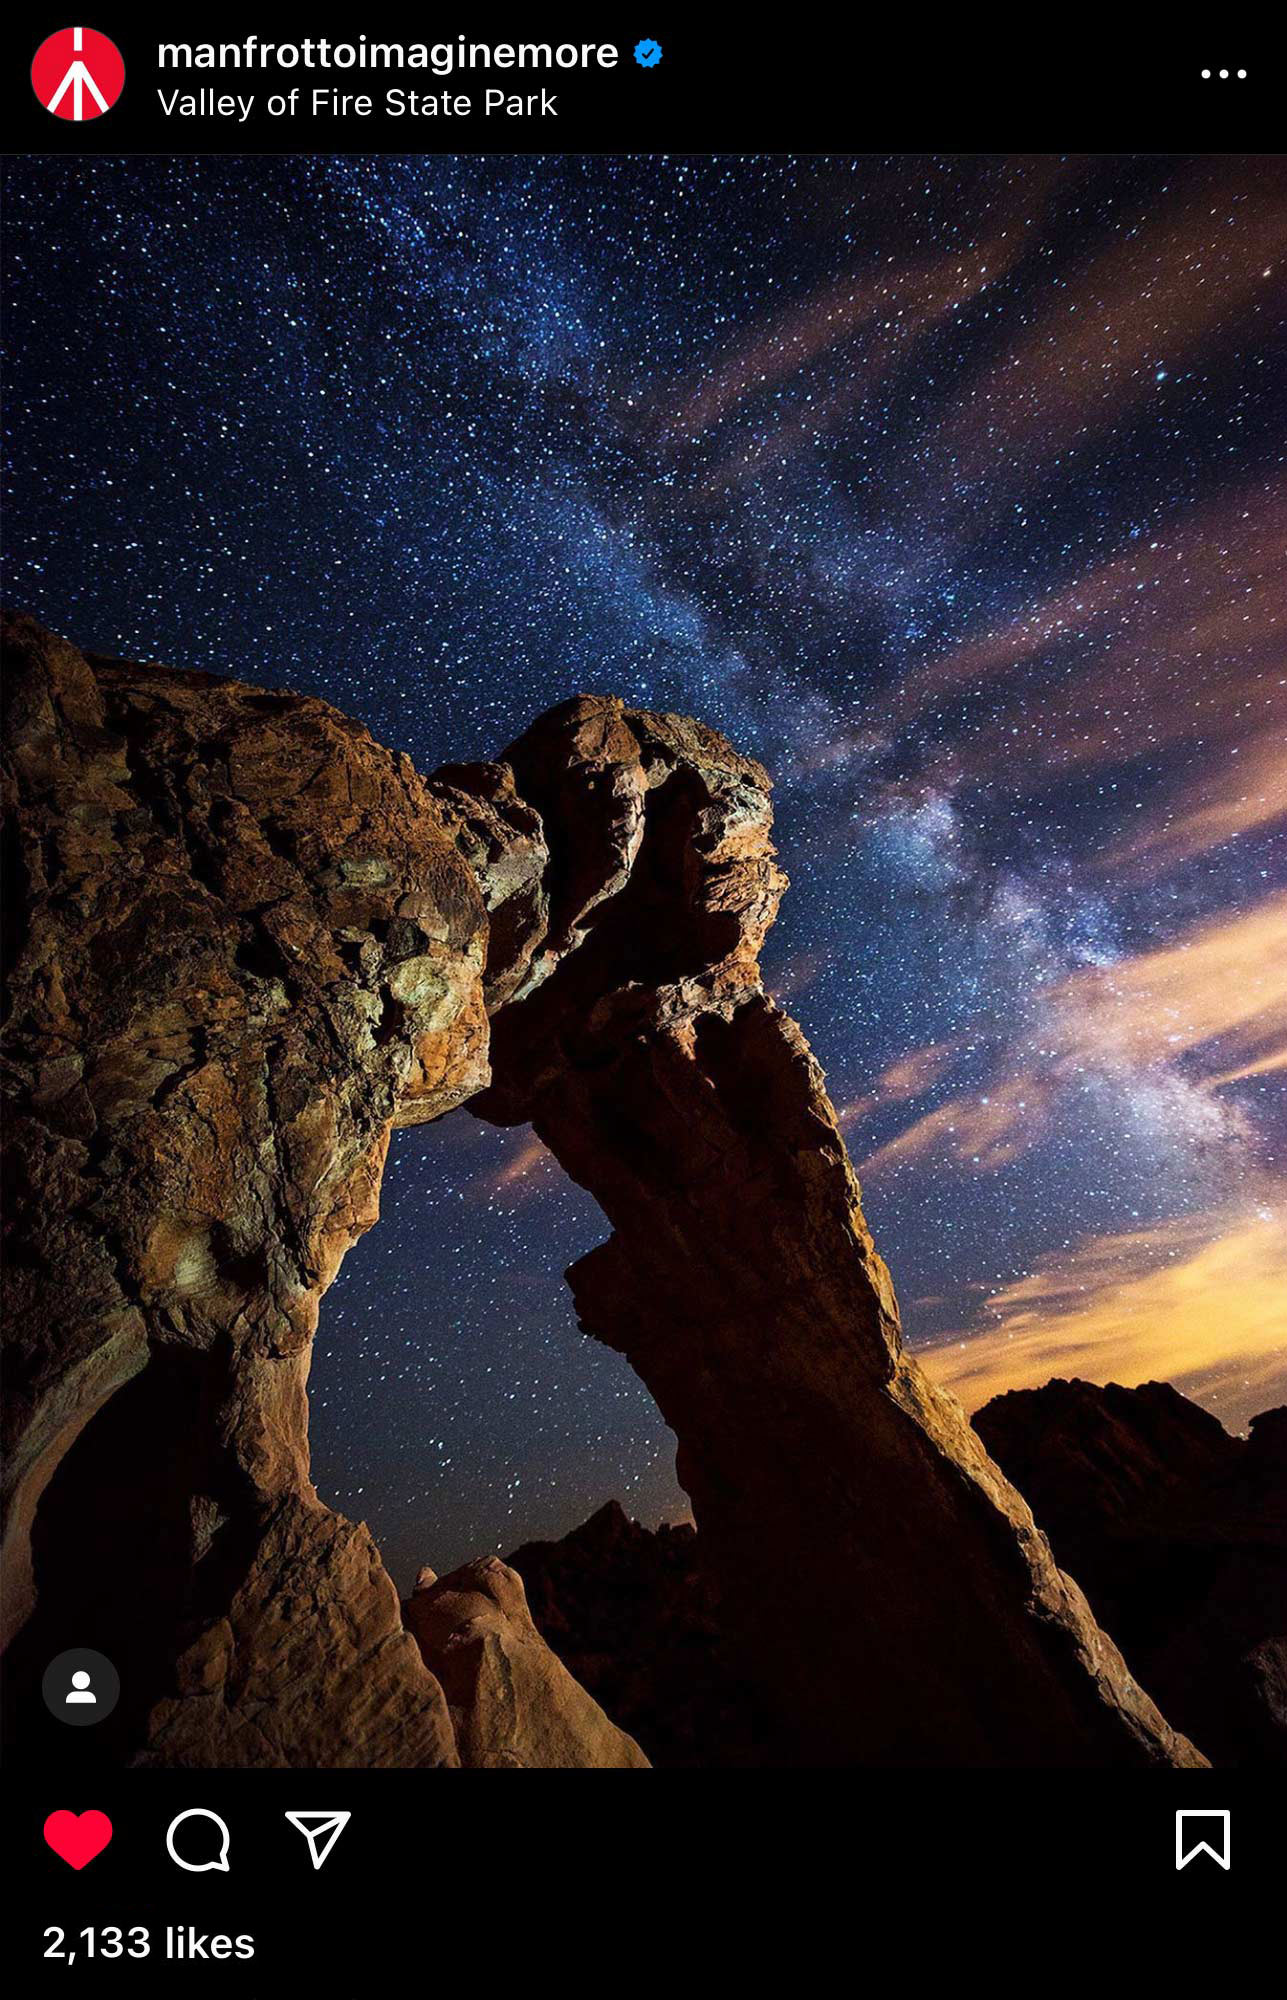 Elephant Rock under the Milky Way in Nevada for Manfrotto on Instagram.